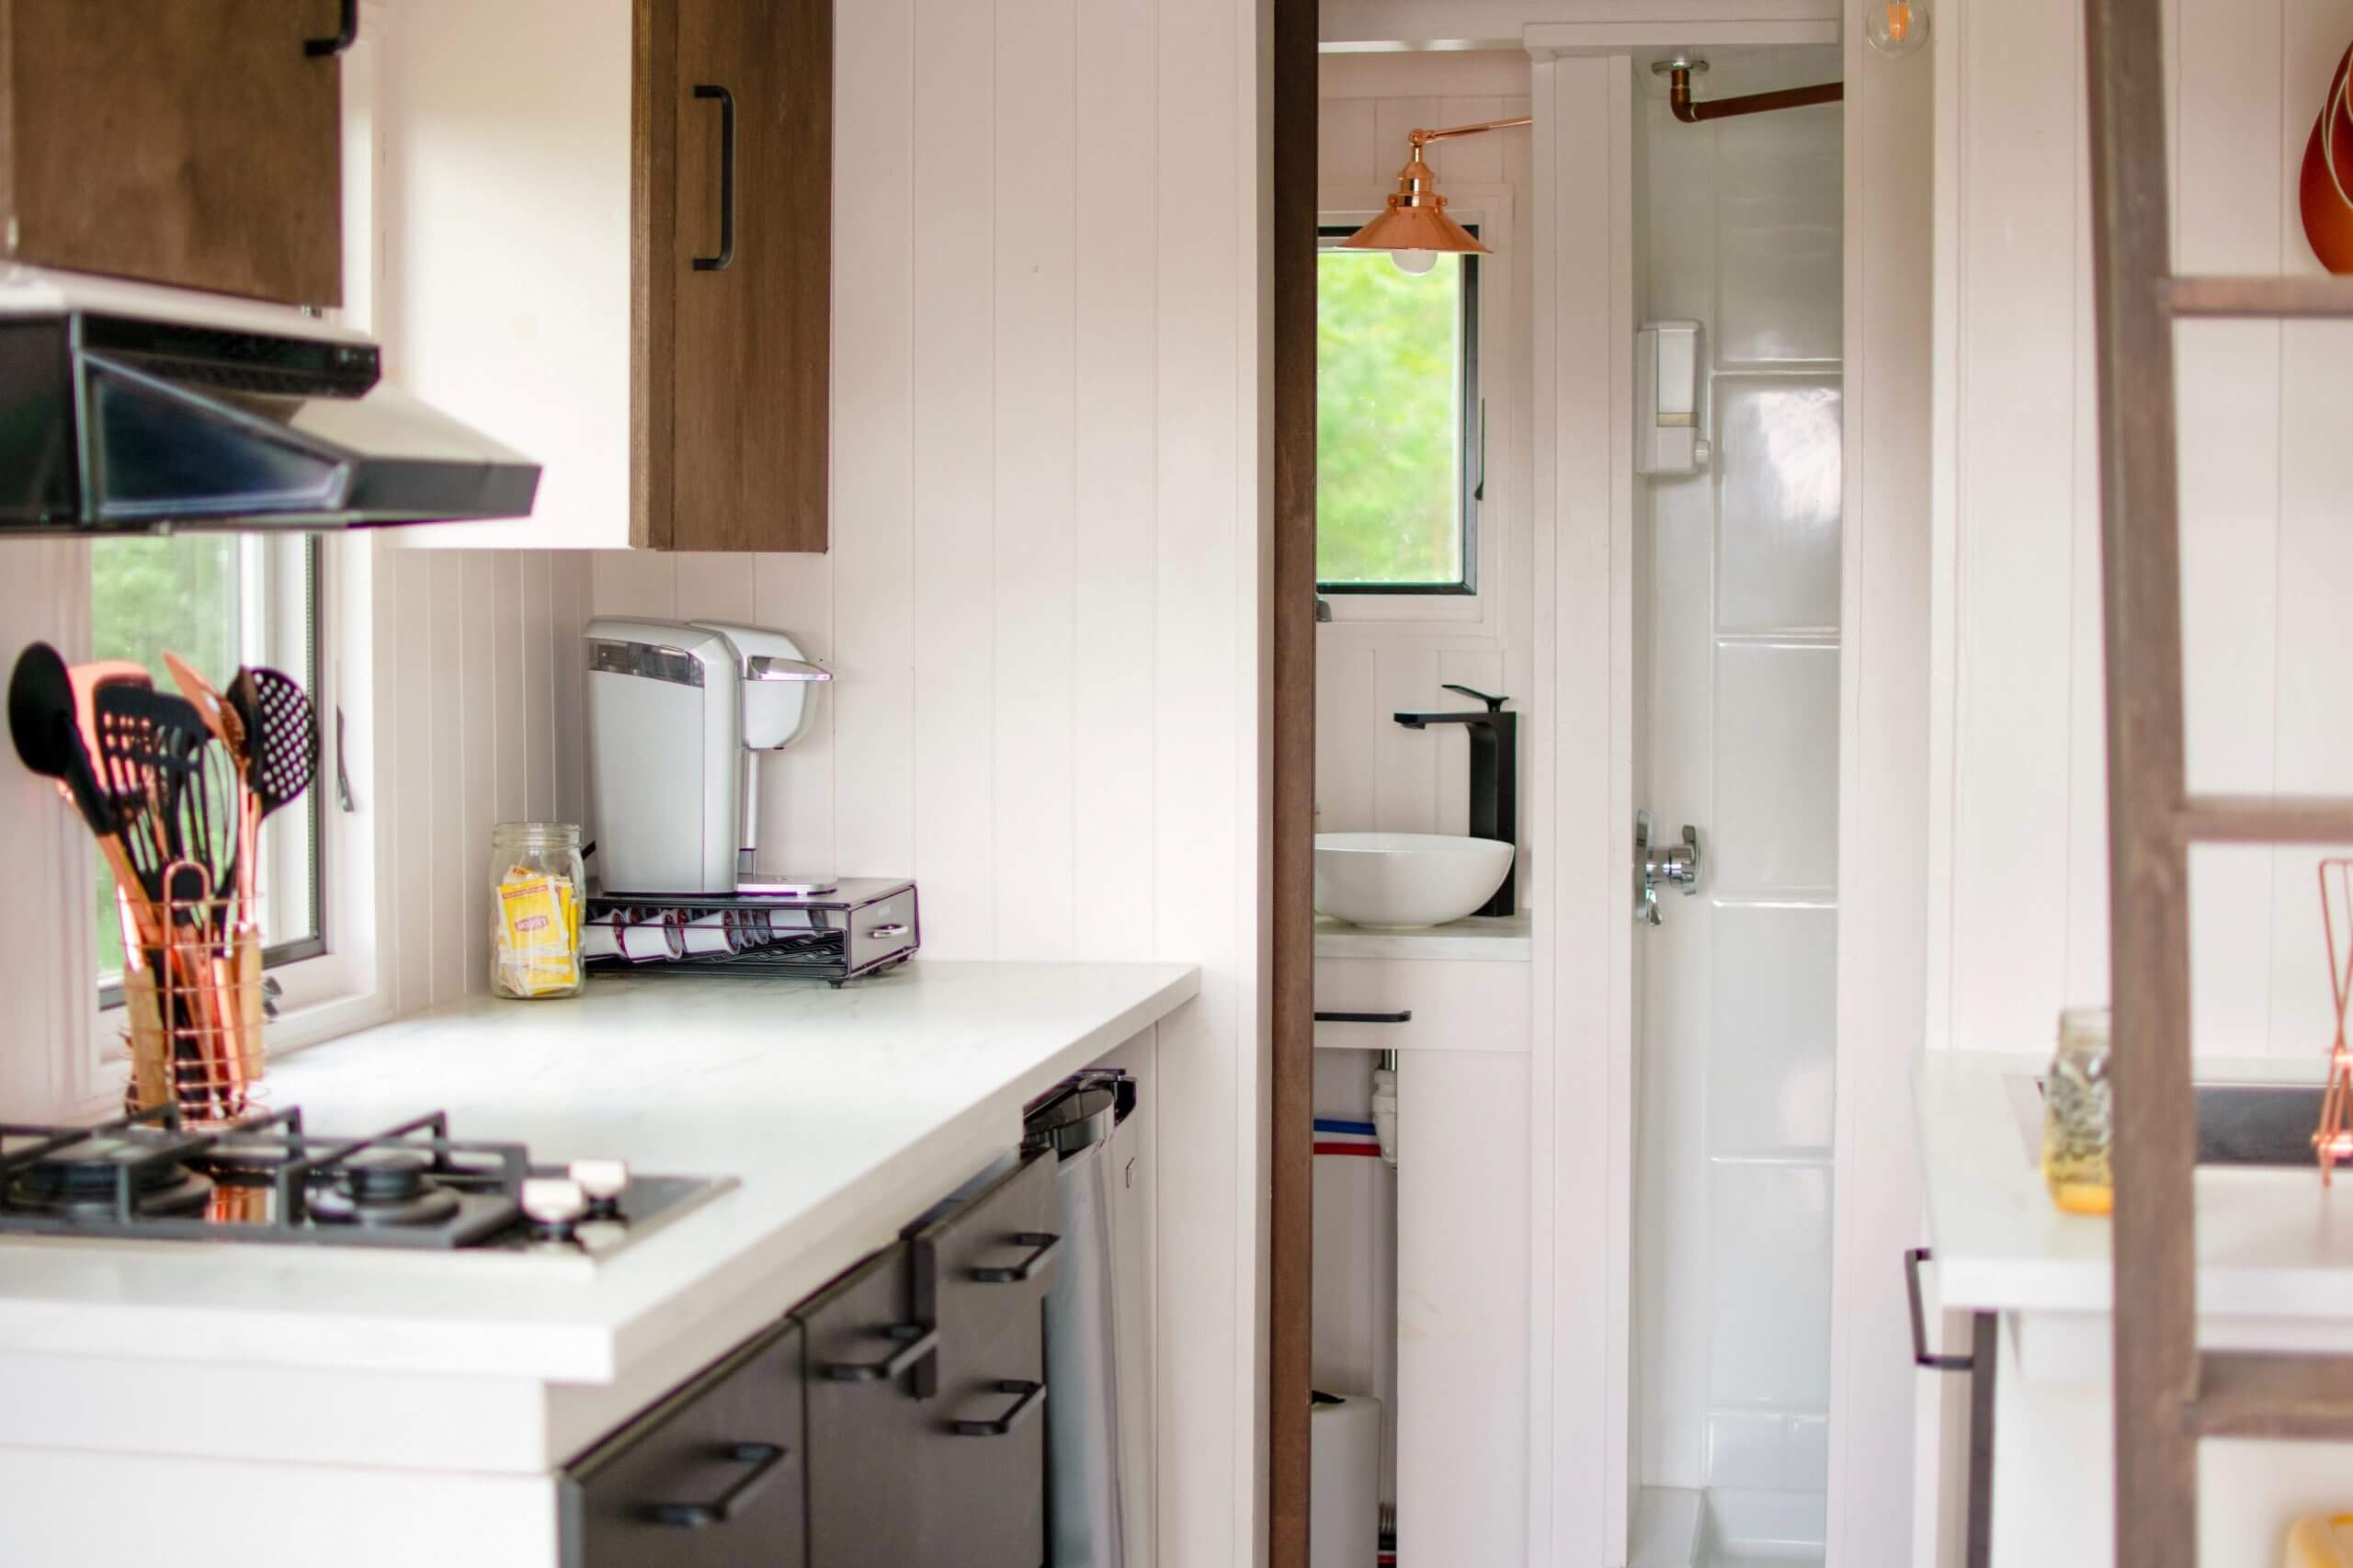 Inside of tiny home showing kitchenette and glimpse of bathroom